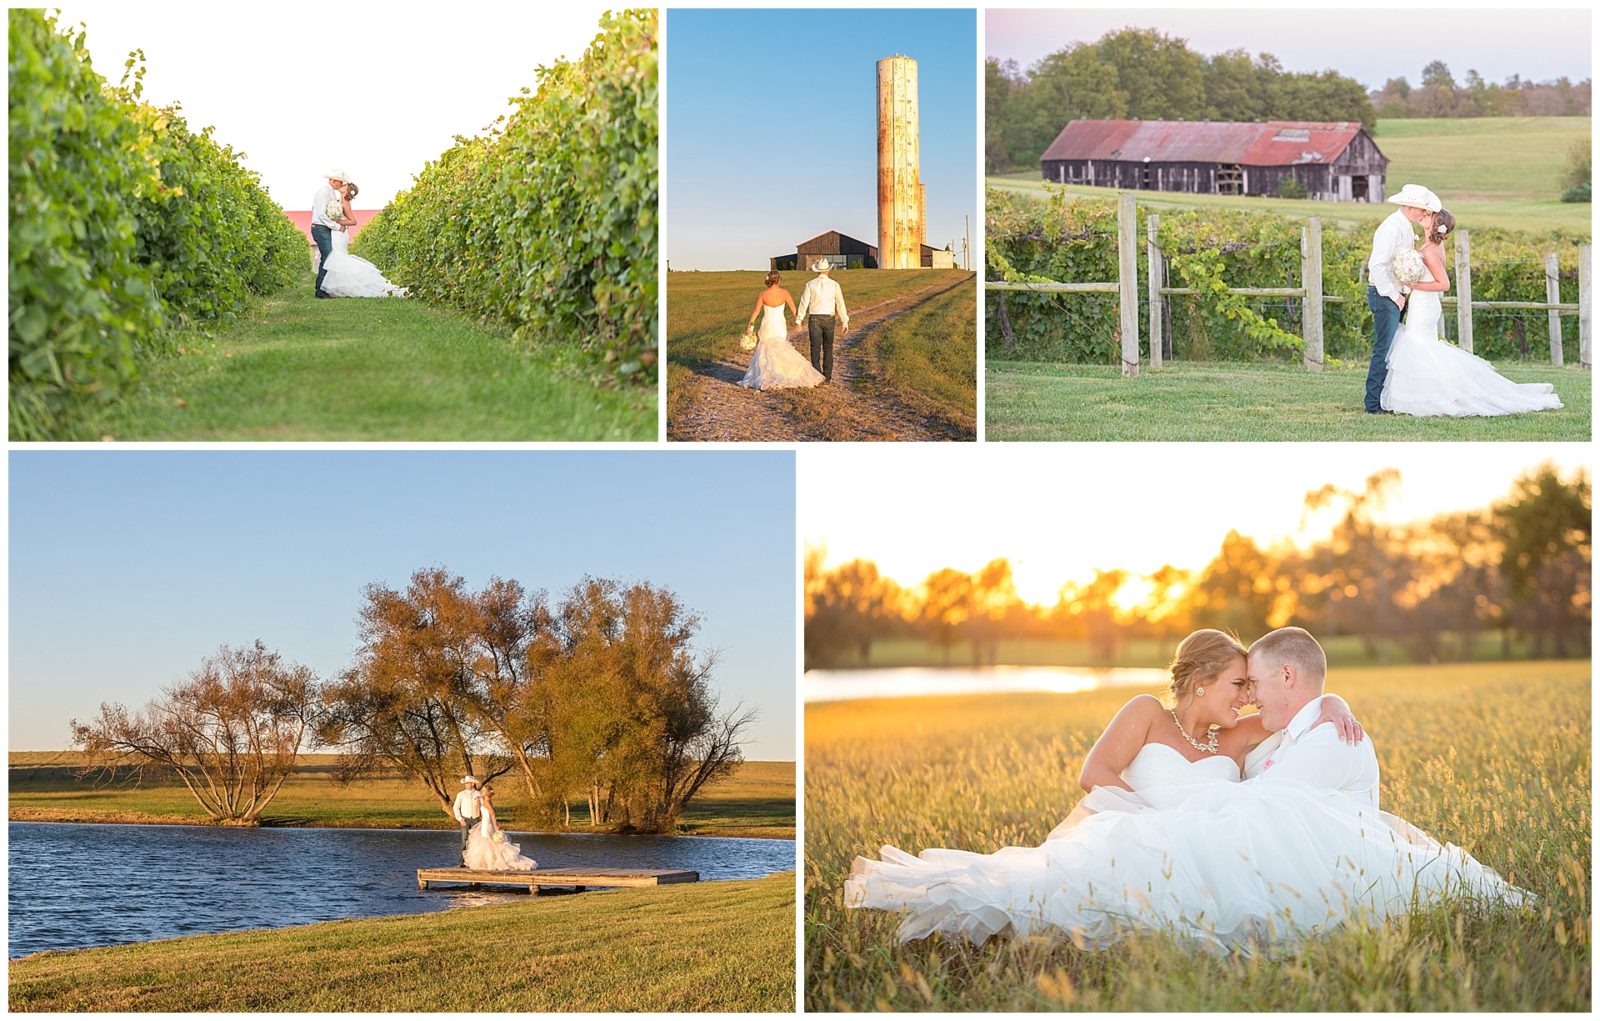 Talon Winery a 300-acre winery nestled amongst some of Lexington Kentucky's finest horse farms offers a variety of rustic, country spaces for your upcoming wedding. Photo by Kevin and Anna Photography www.kevinandannaweddings.com